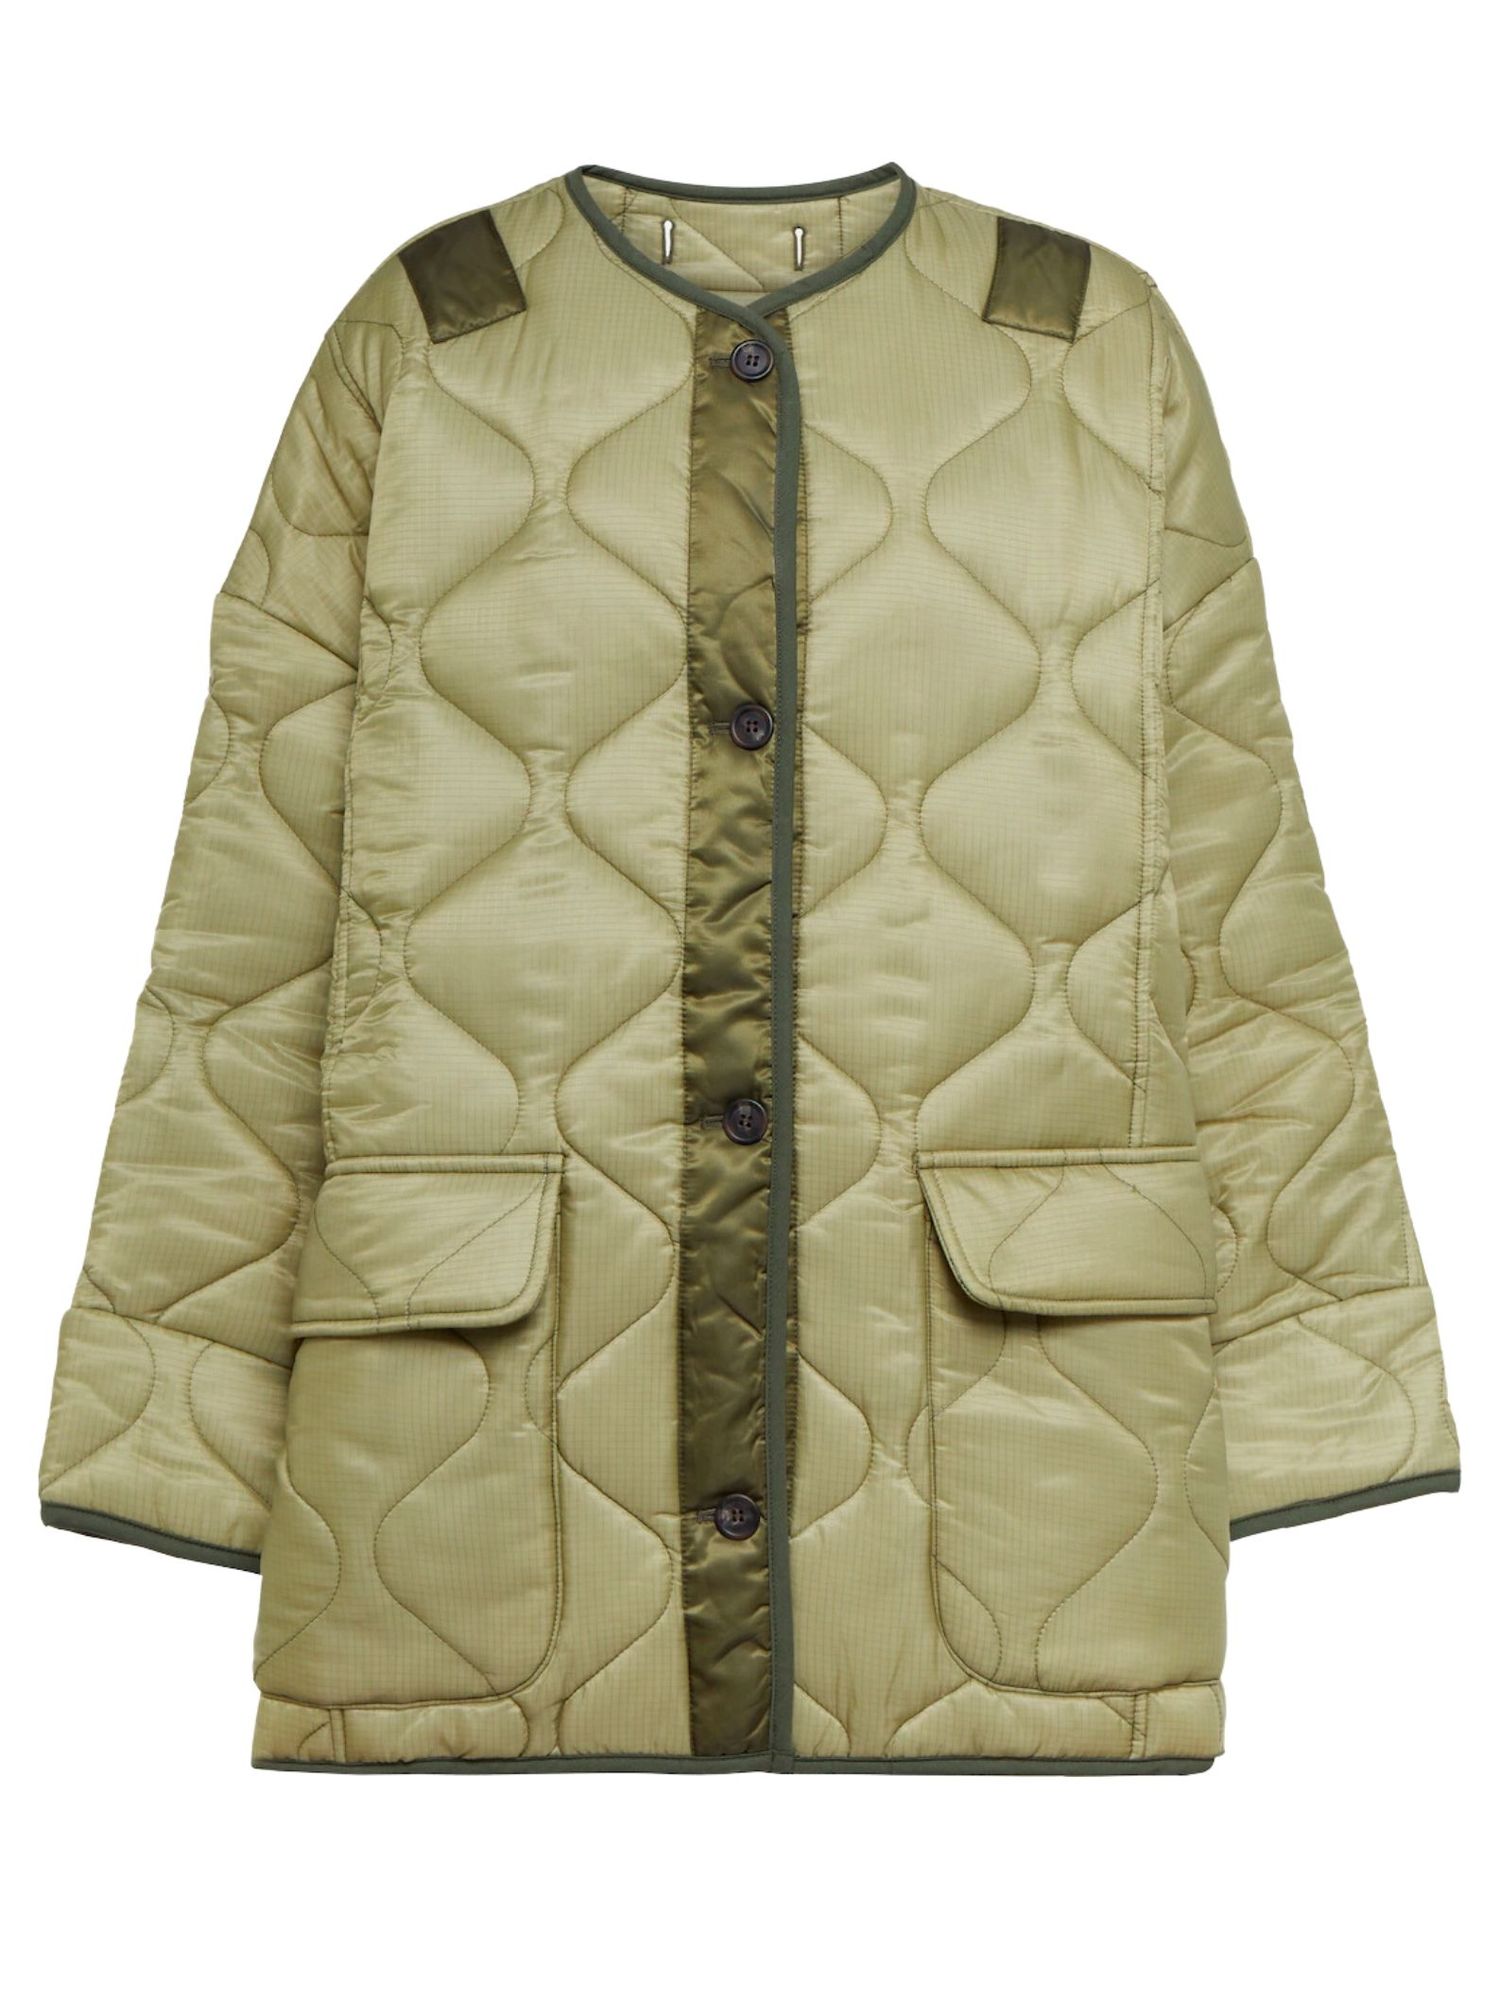 12 Vogue-approved quilted jackets you can't go without this autumn ...